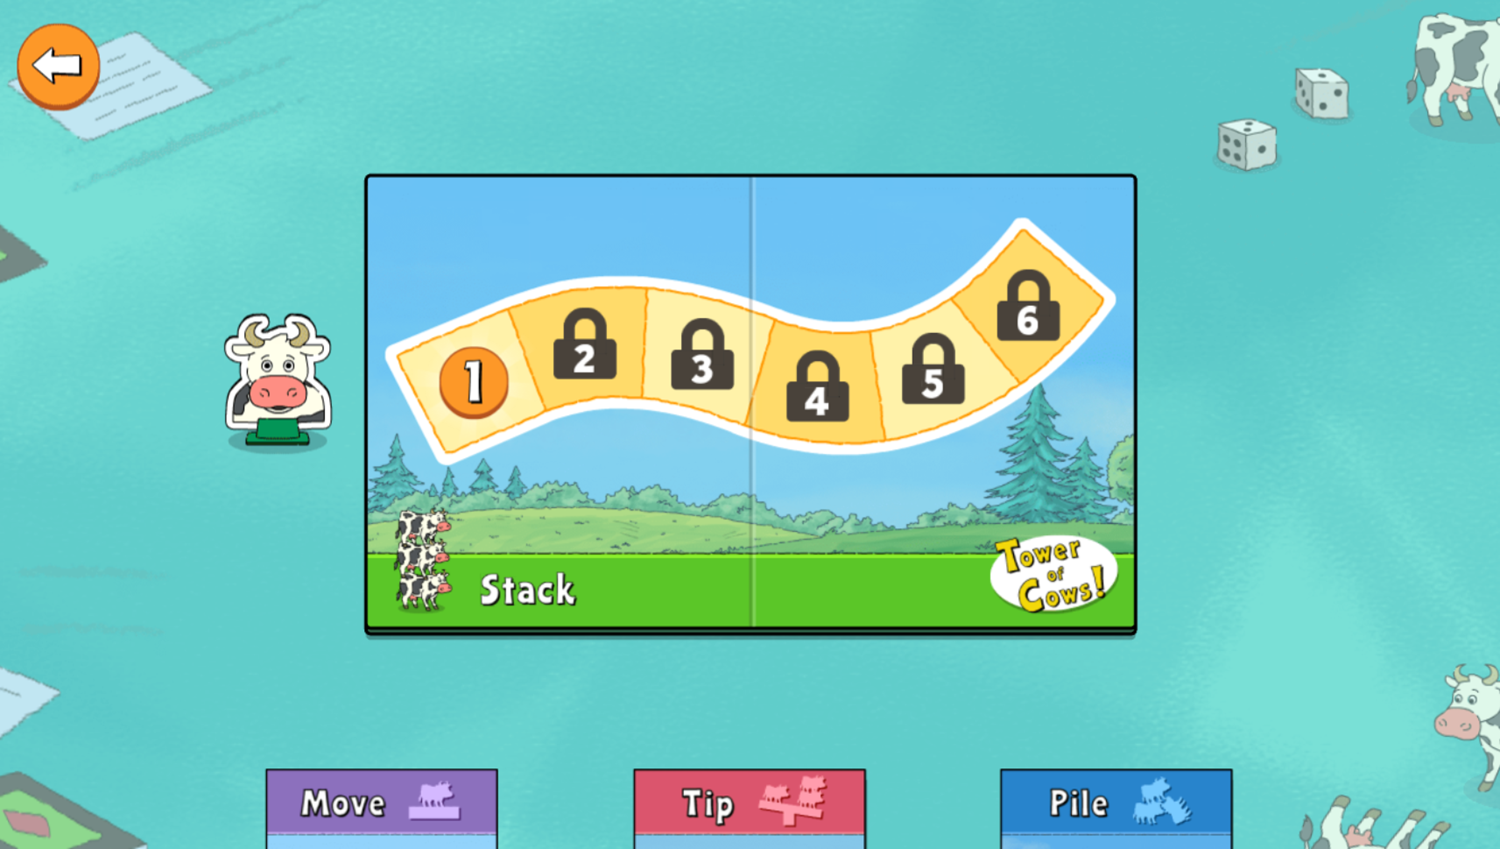 Arthur Tower of Cows Game Stack Level Select Screenshot.